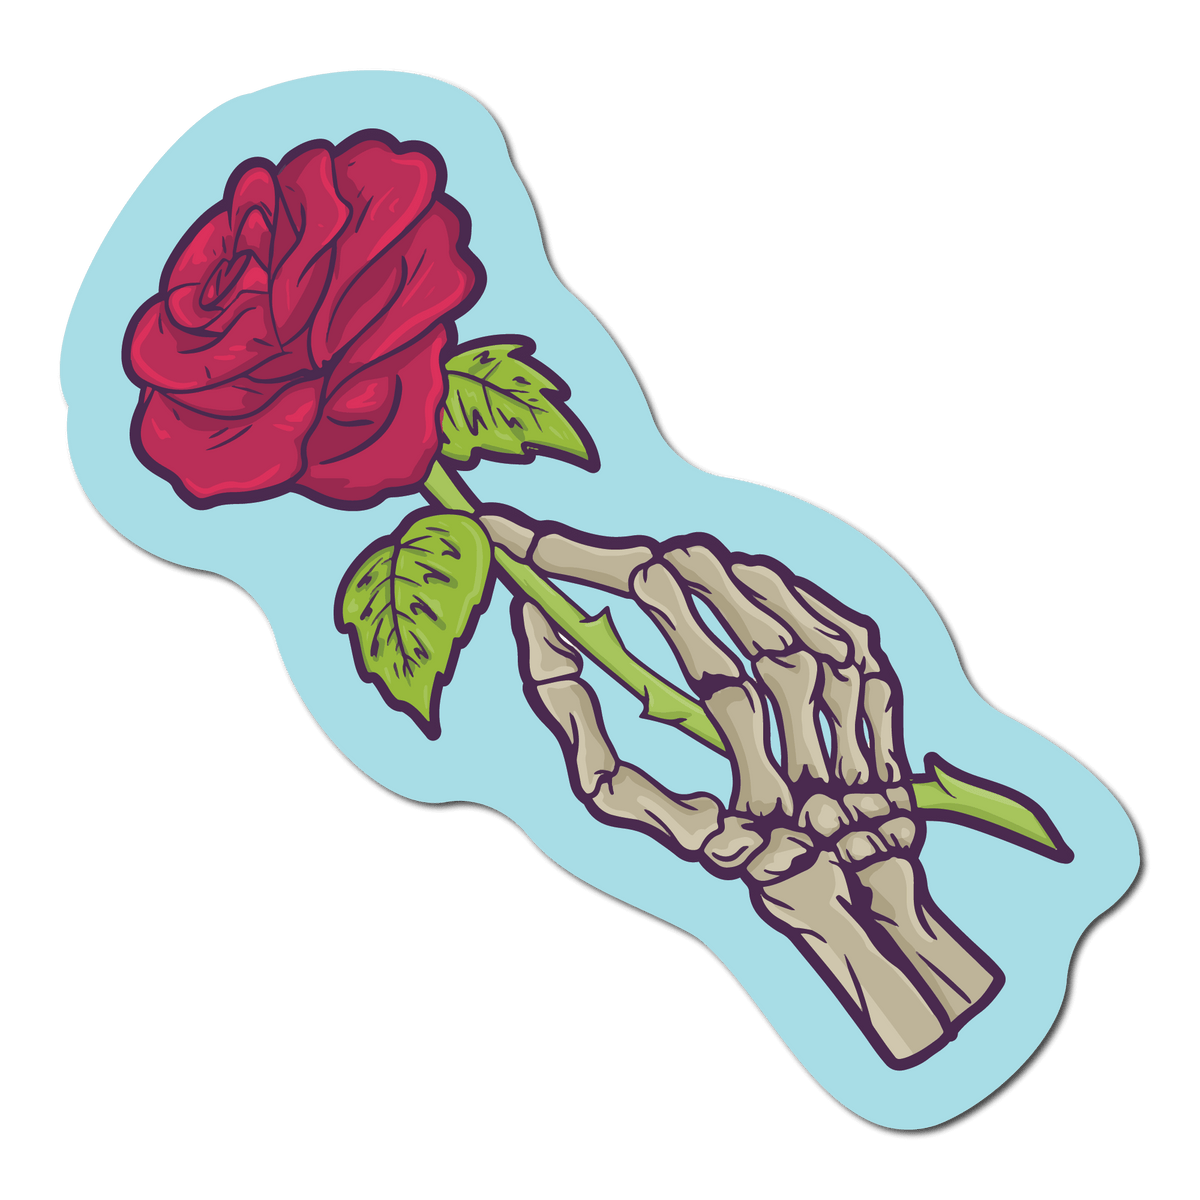 Small Sticker of a Skeleton Hand Holding a Rose